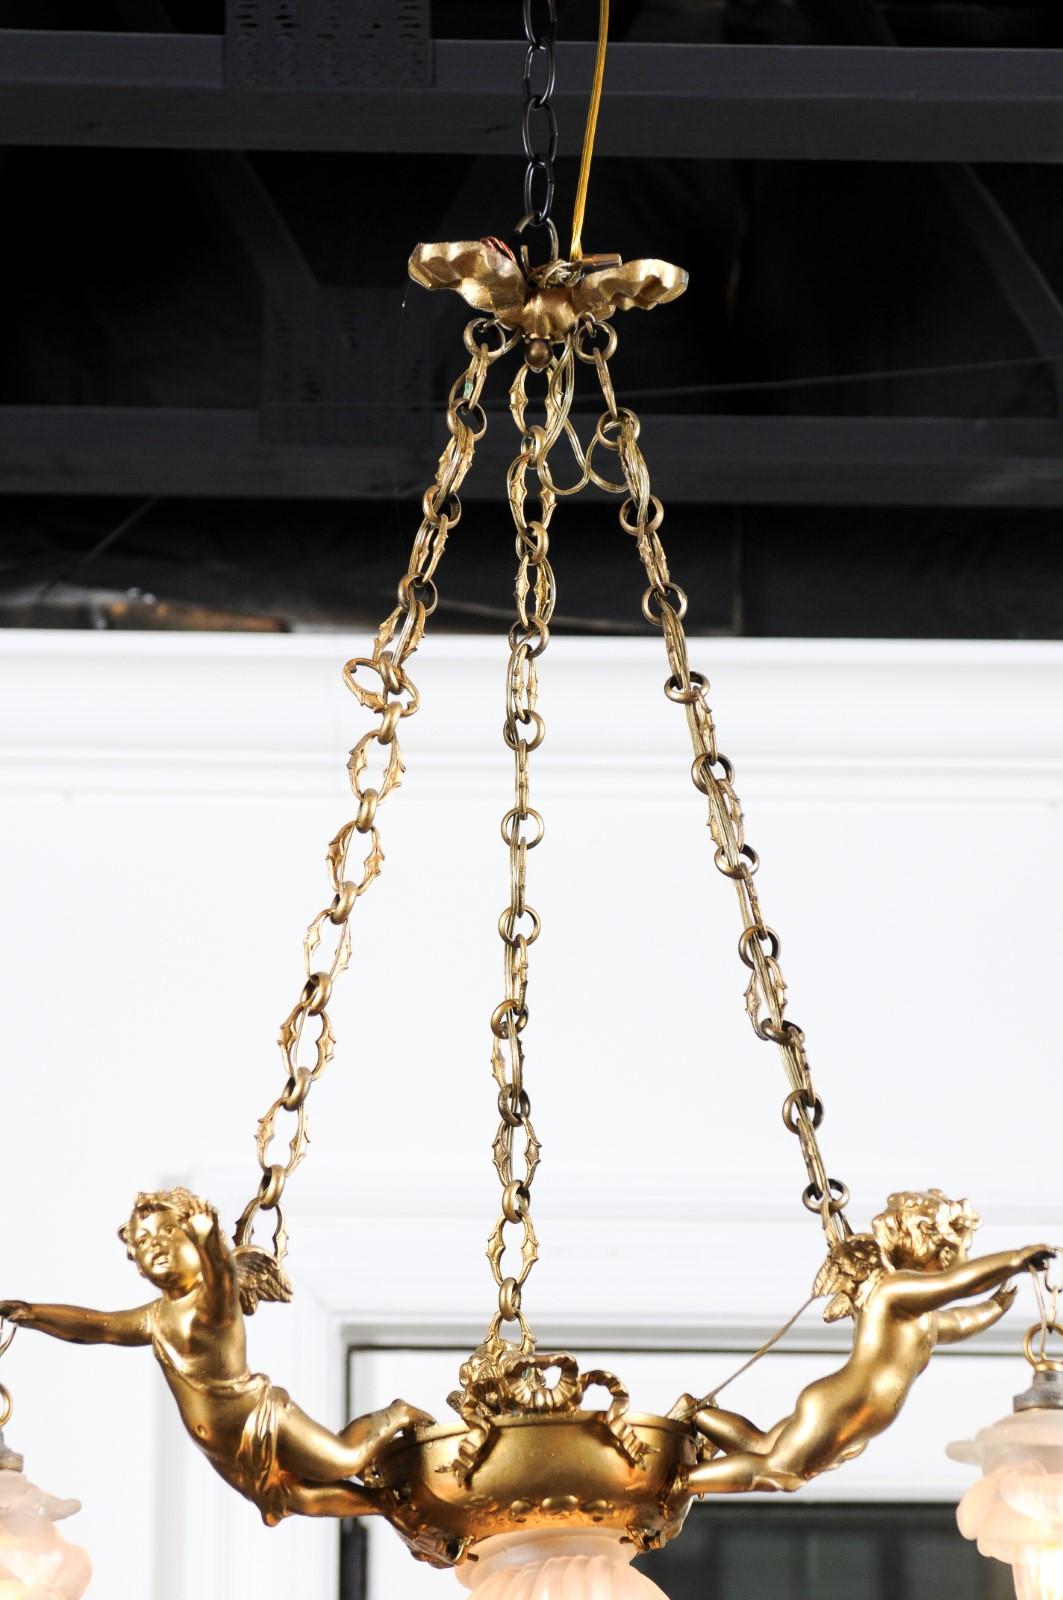 A French gilt metal three-light chandelier from the 19th century, with ribbons and cherubs holding the shades. Born in France during the 19th century, this three-light chandelier features a ribbon-tied canopy, supporting profiled links. The lower